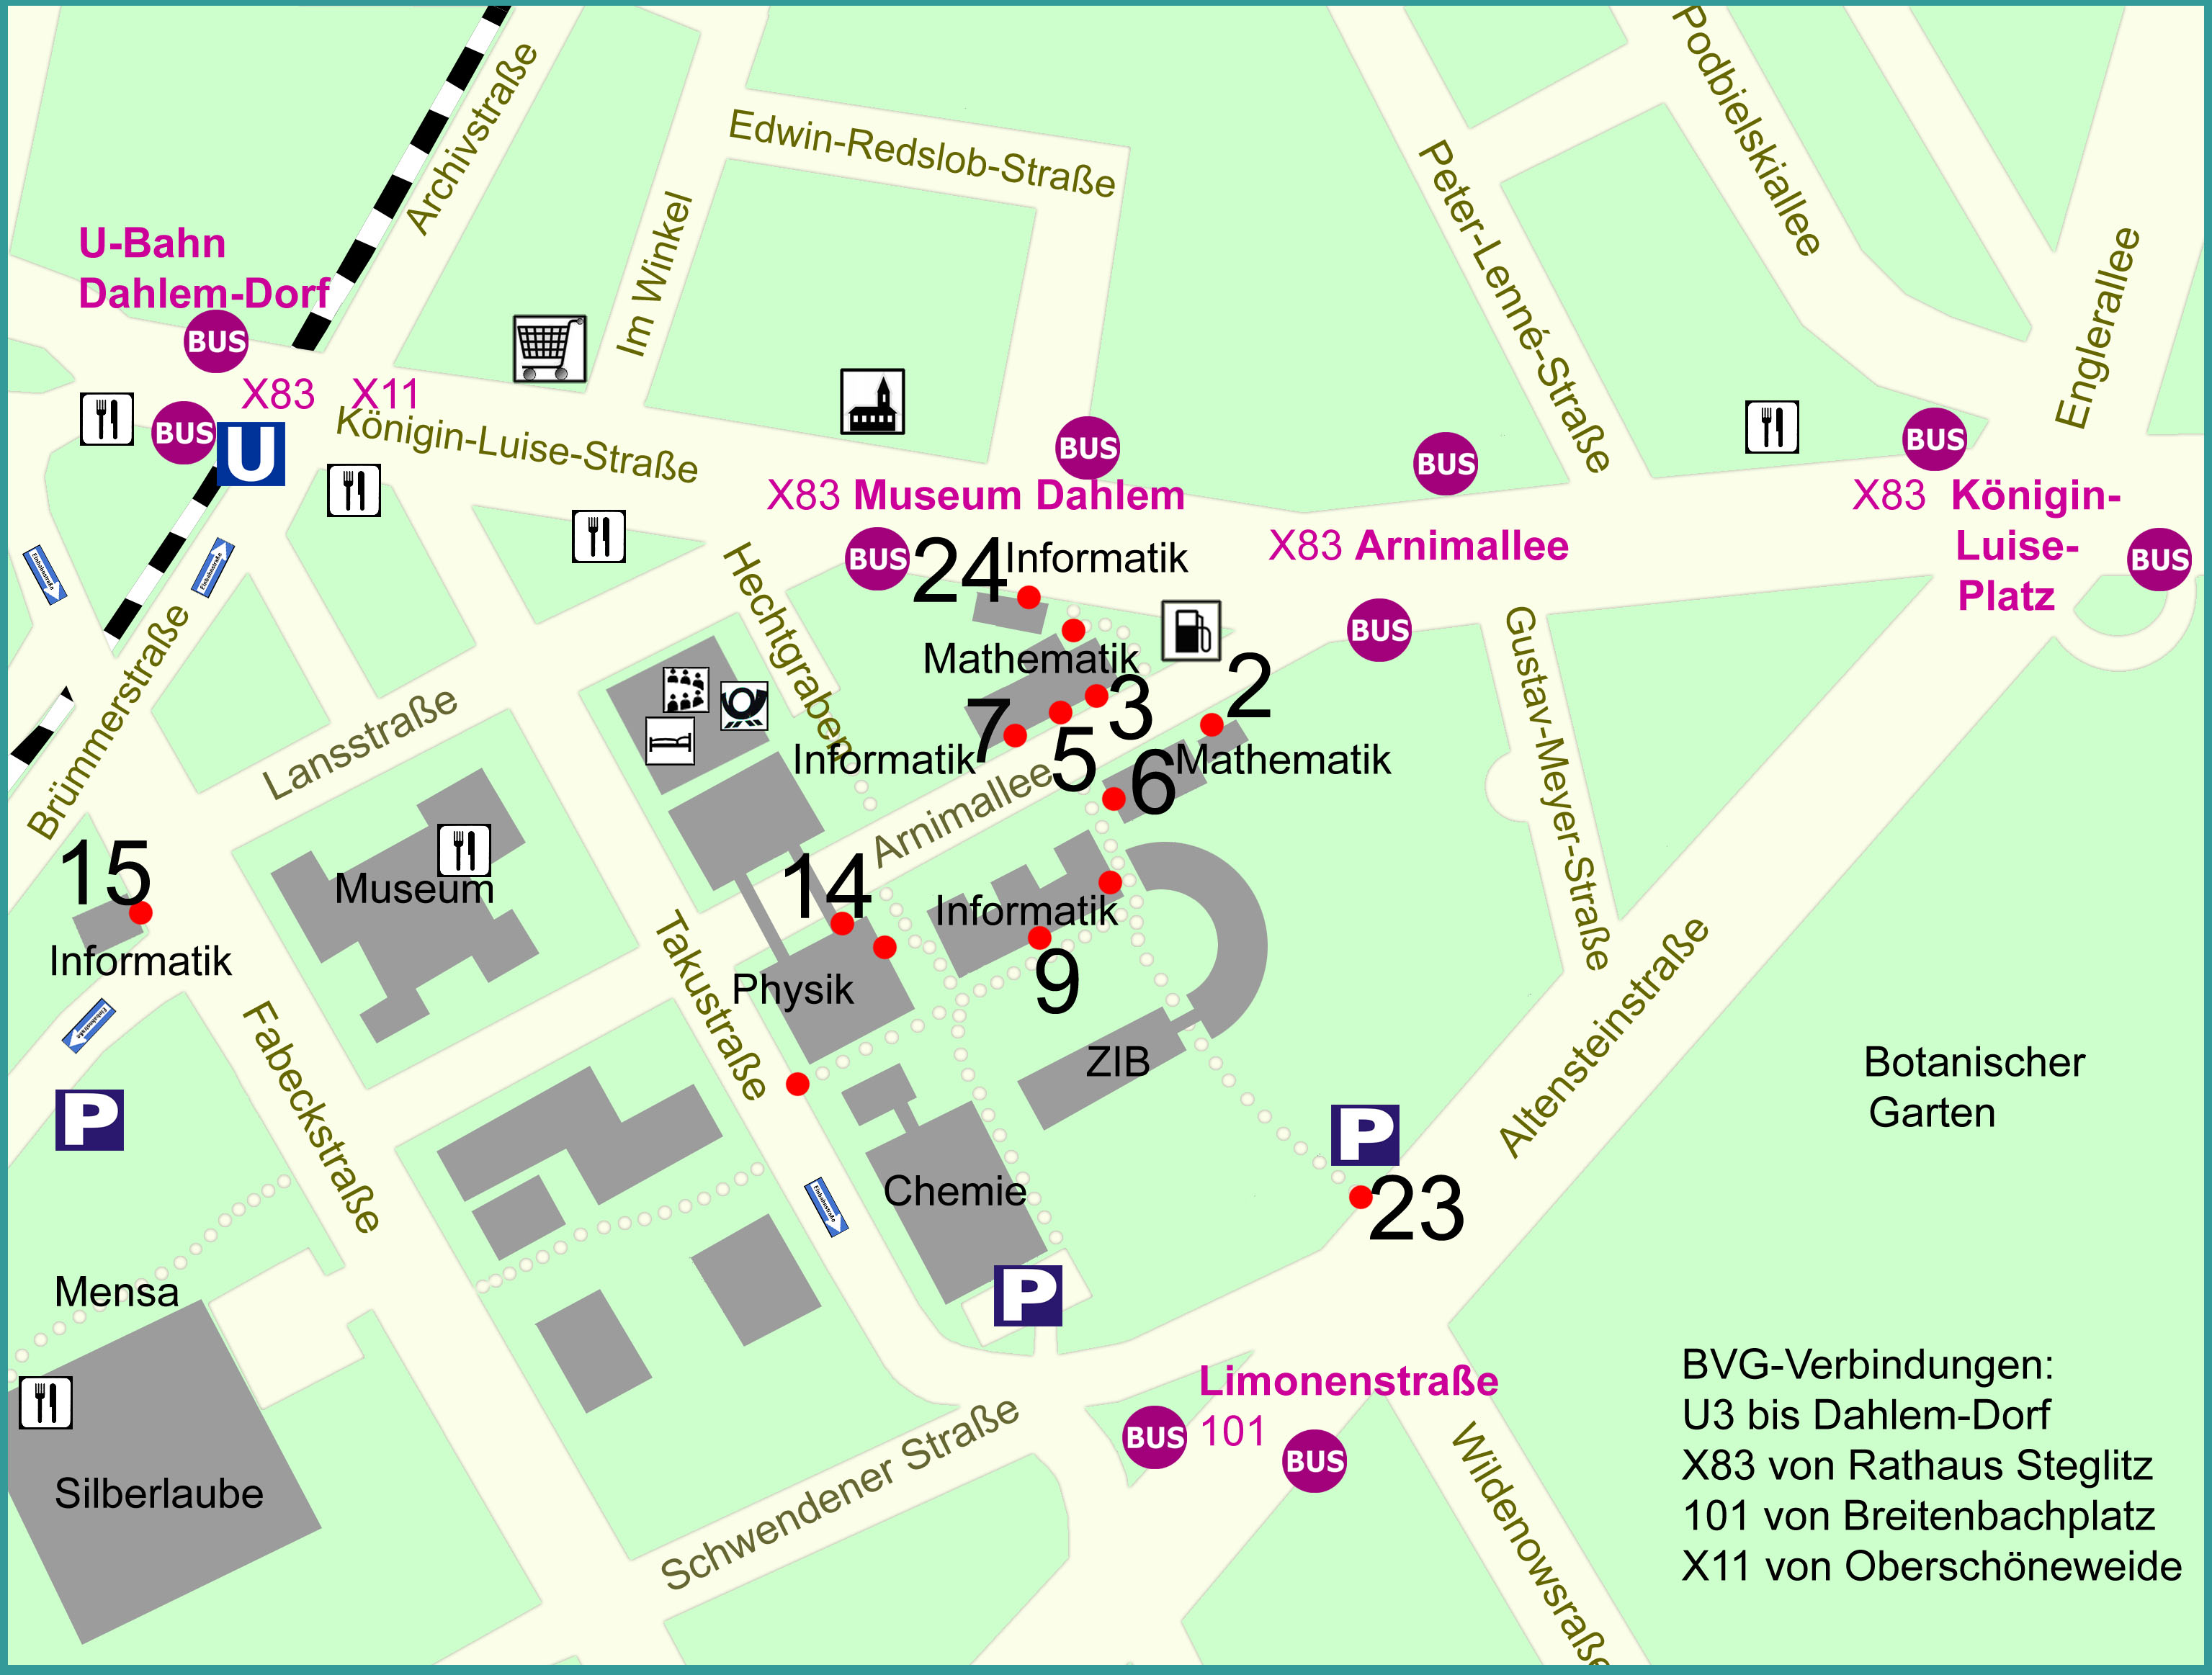 Detailed partial campus map